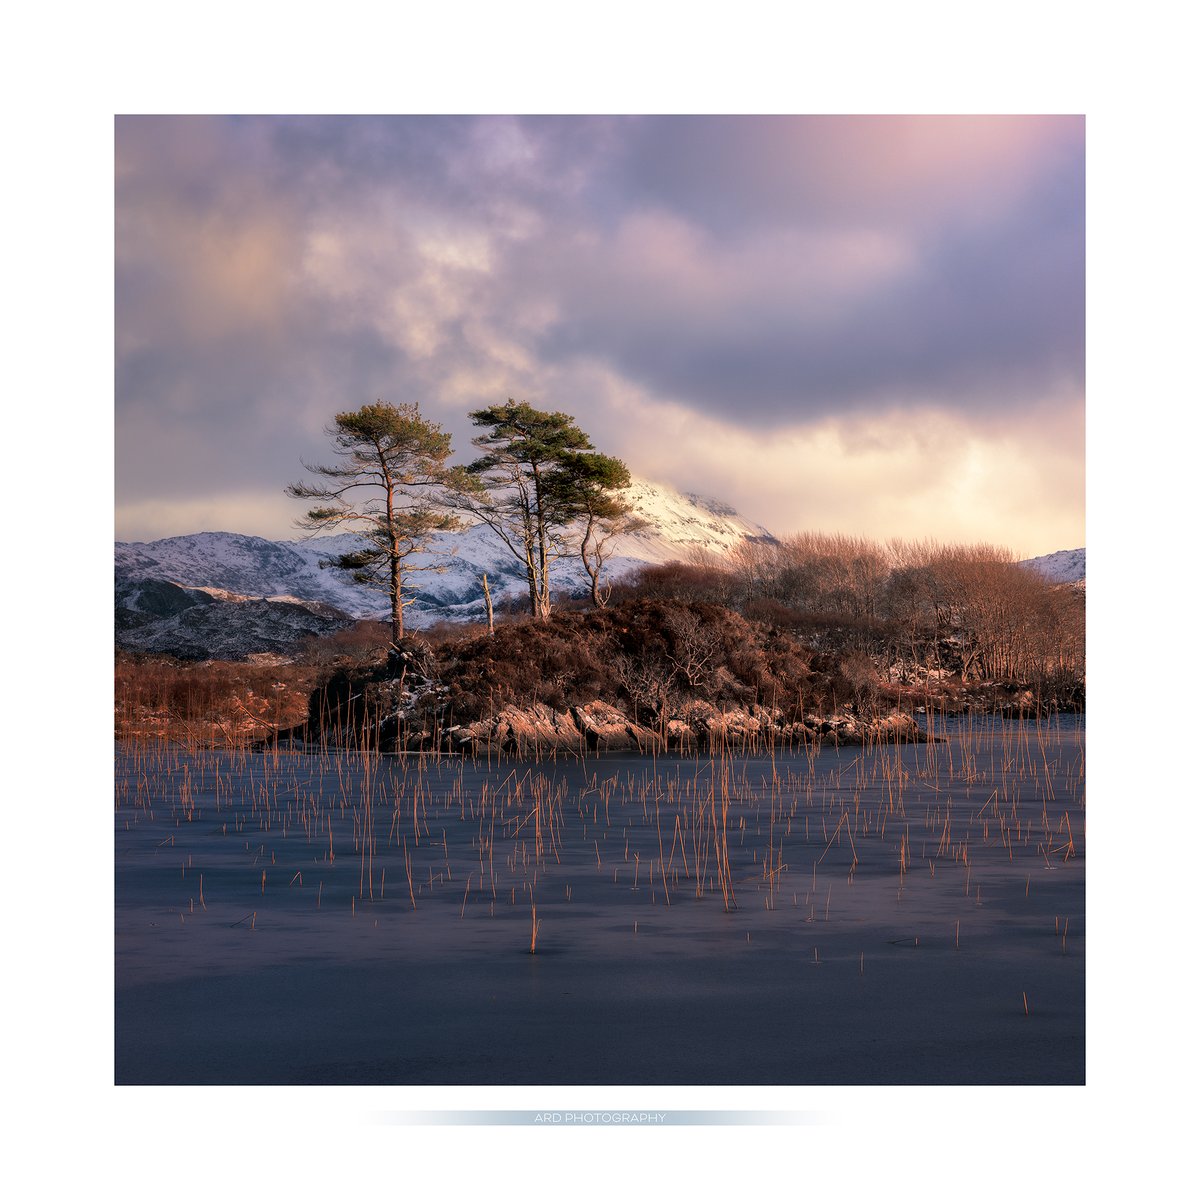 LOCH DRUIM SUARDALAIN I've shown photos of this spot before, but on this occasion the frozen loch and quick break of sunlight on the scene helped it along. #assynt